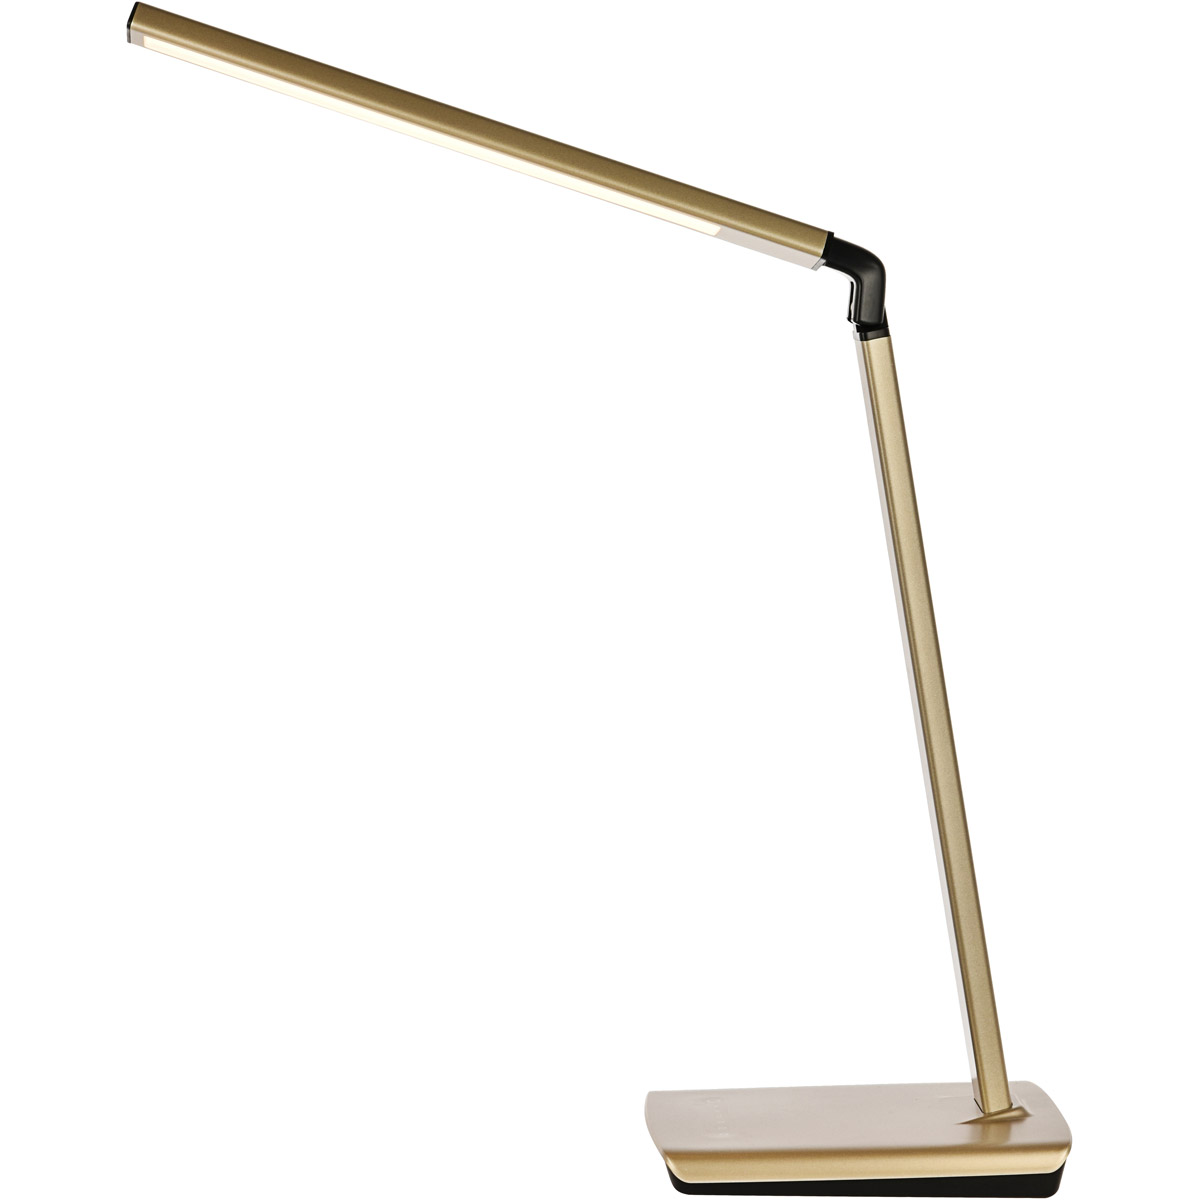 Ledds002 Sleek Led Desk Lamp With Smooth Touch Dimmer & Usb, Champagne Gold